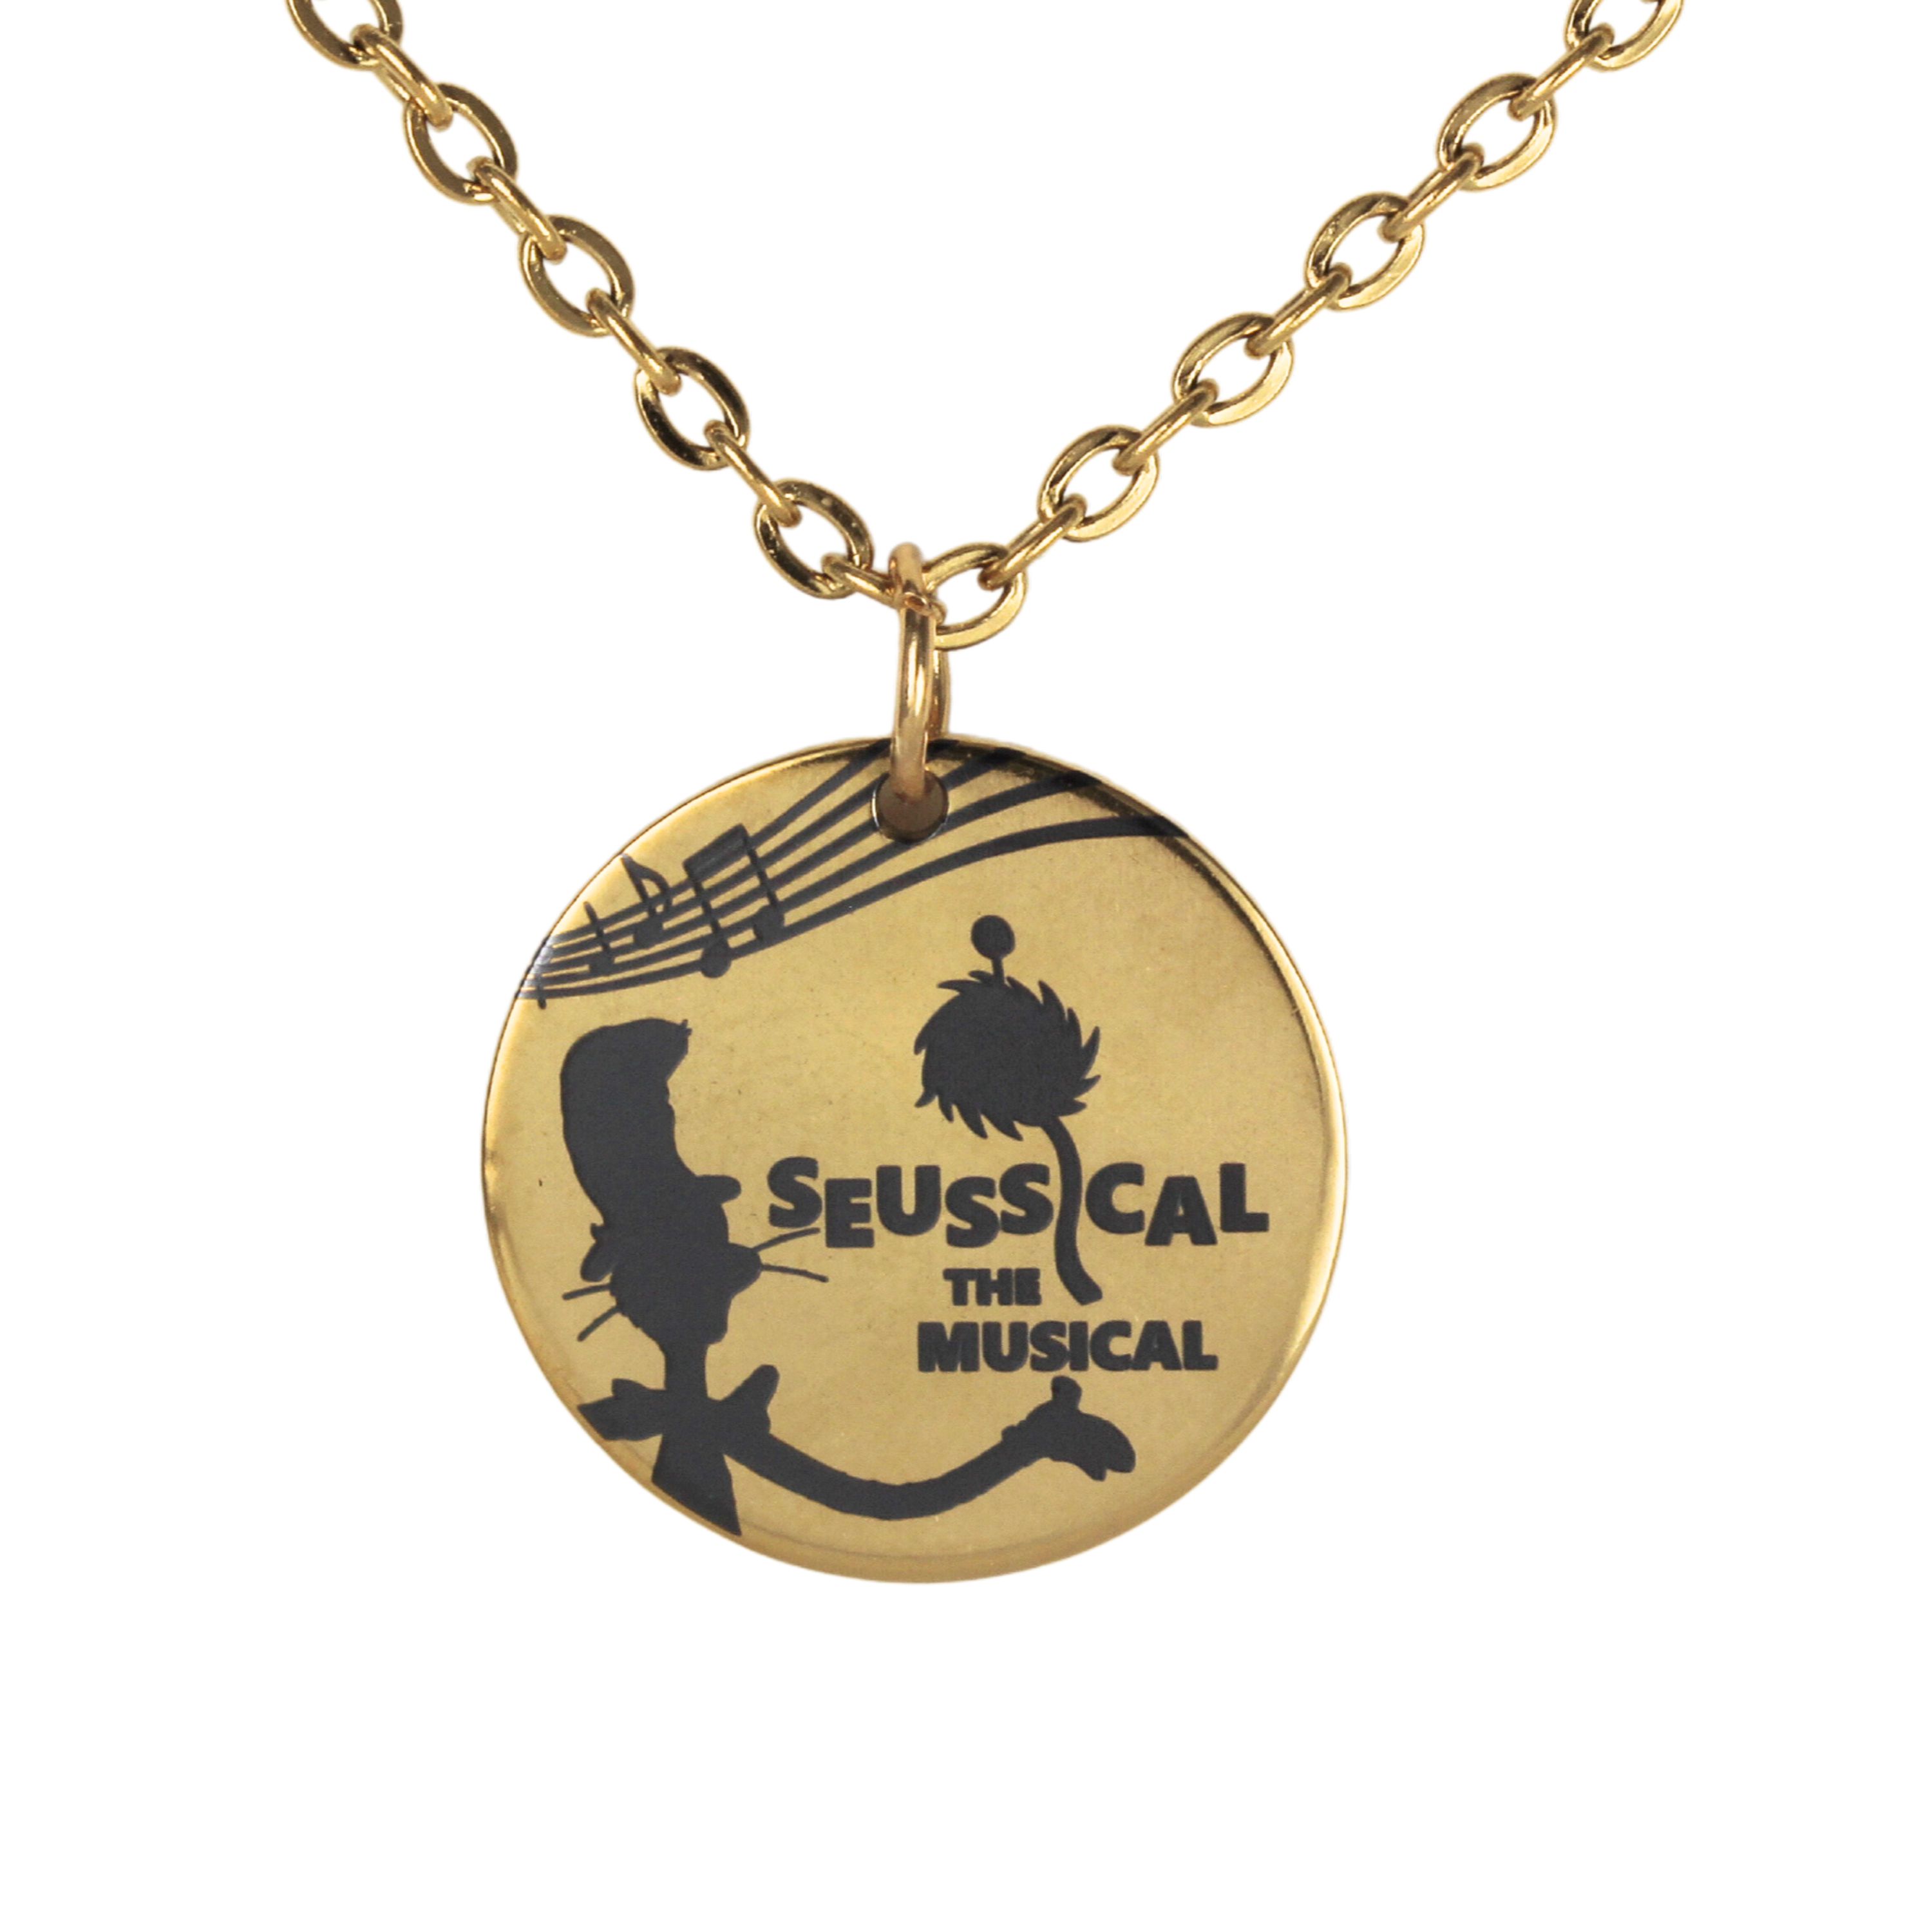 Seussical the Musical inspired necklace with virtual engraving